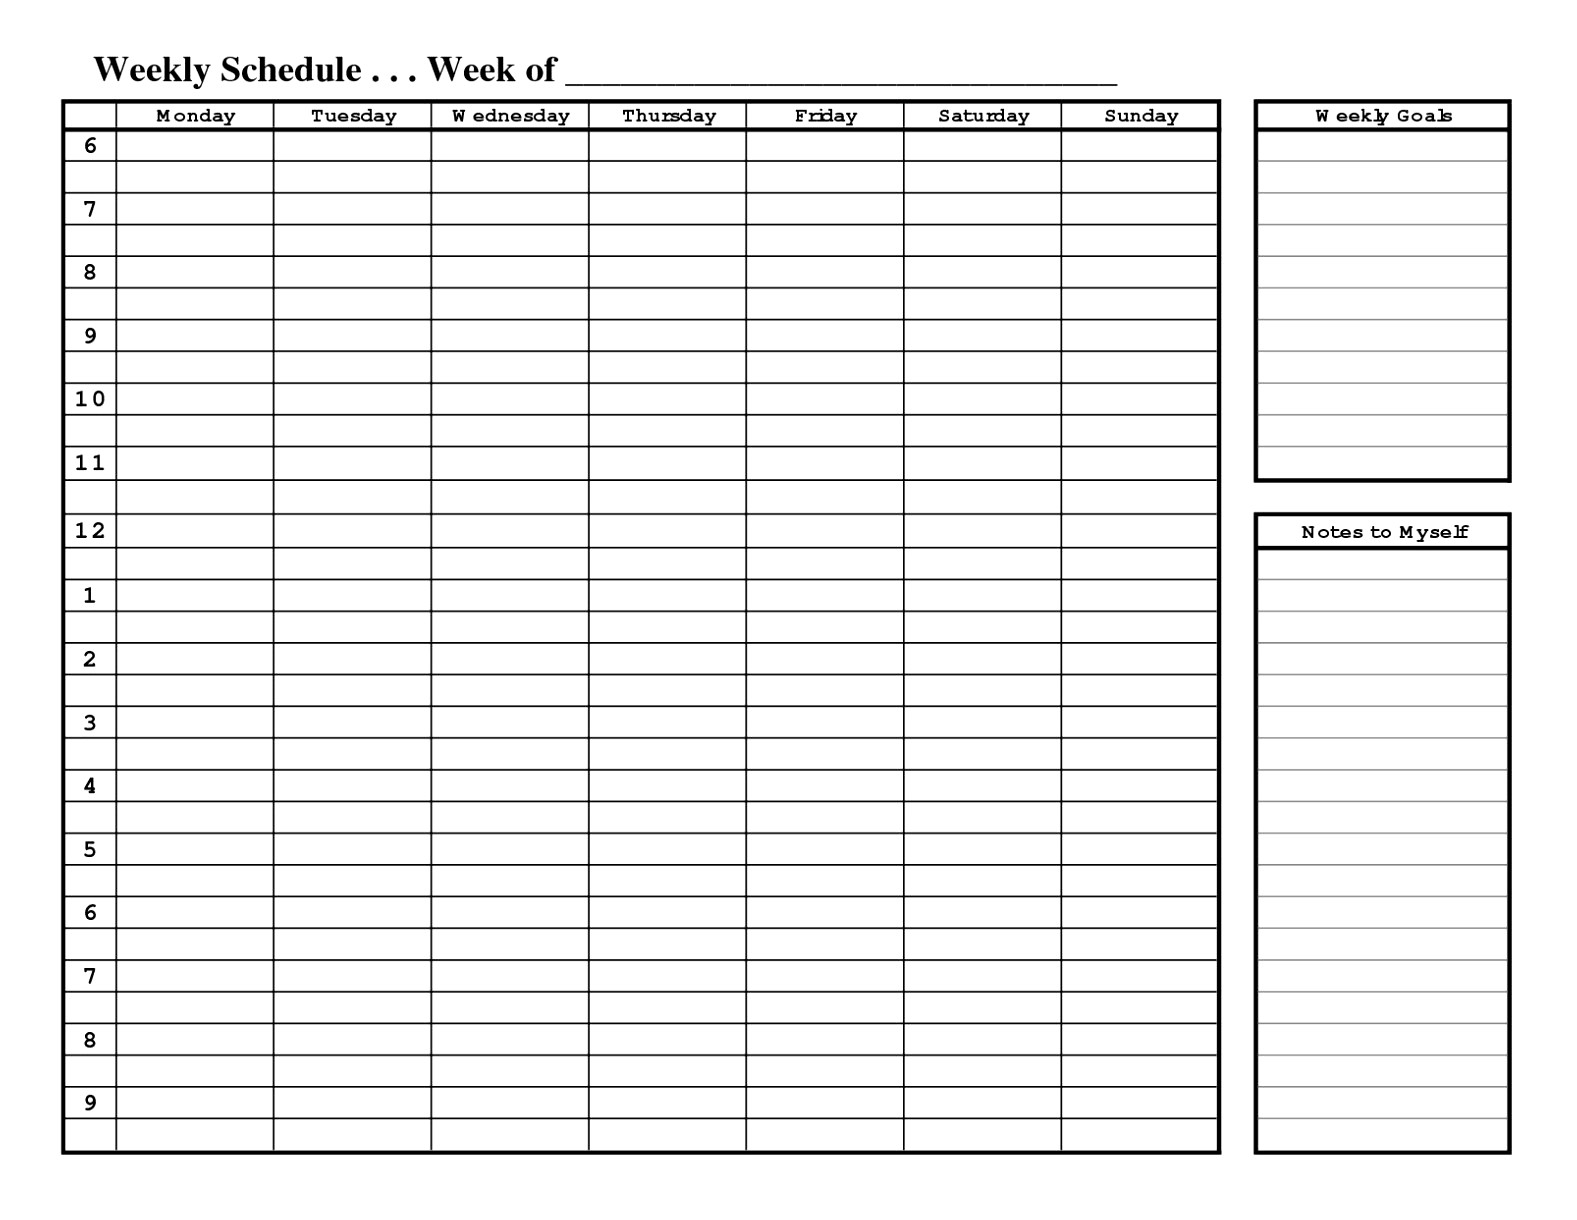 excel daily schedule template free download